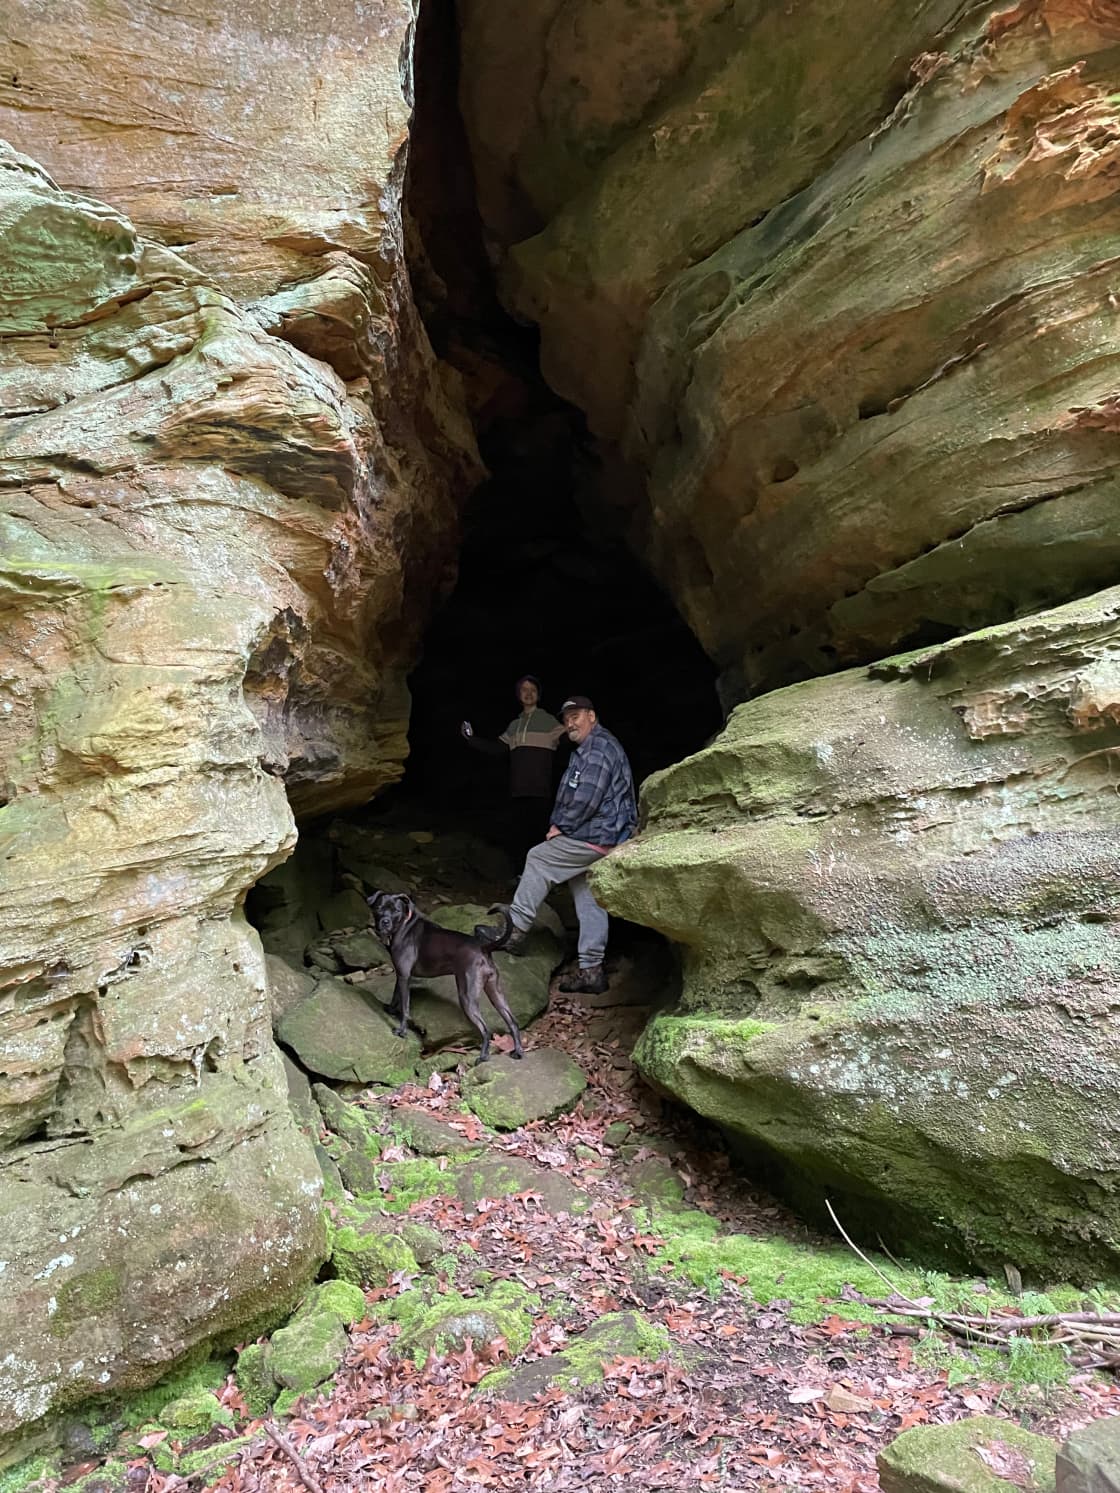 One of the many caves on the property